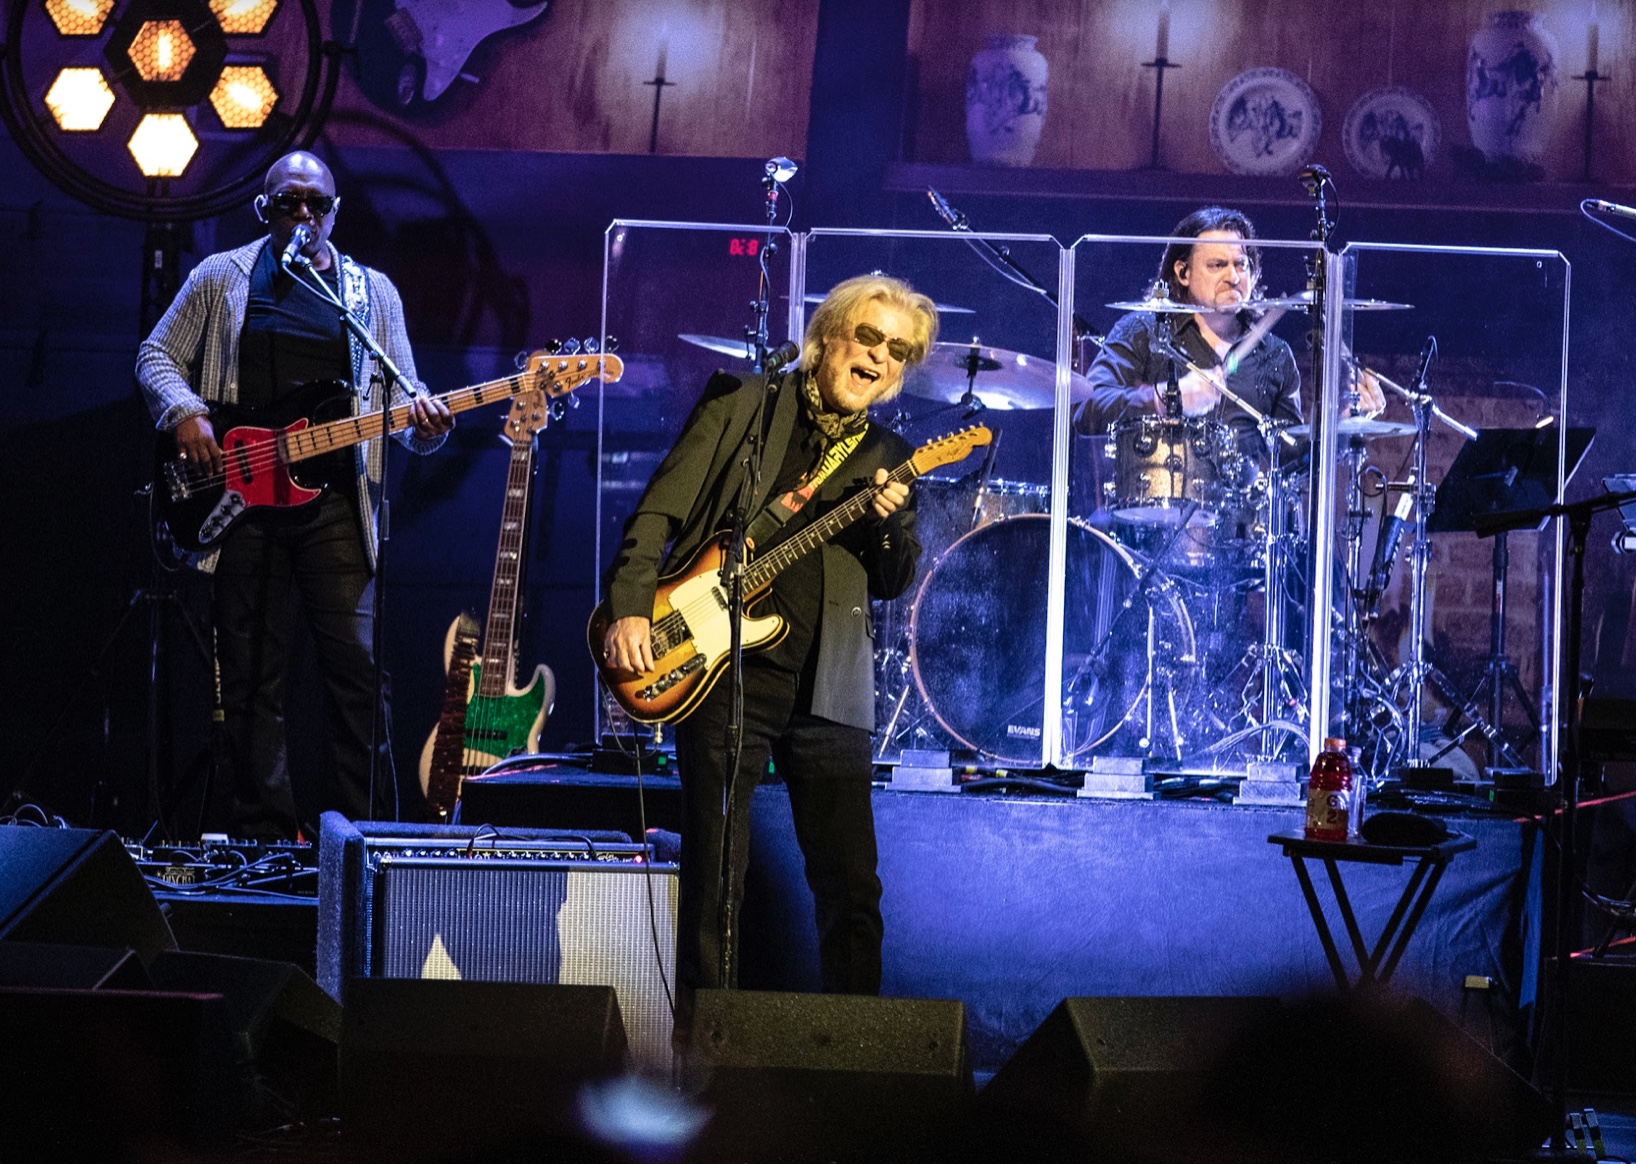 Daryl Hall with Special Guest Todd Rundgren Rocks the ‘House’ on Solo